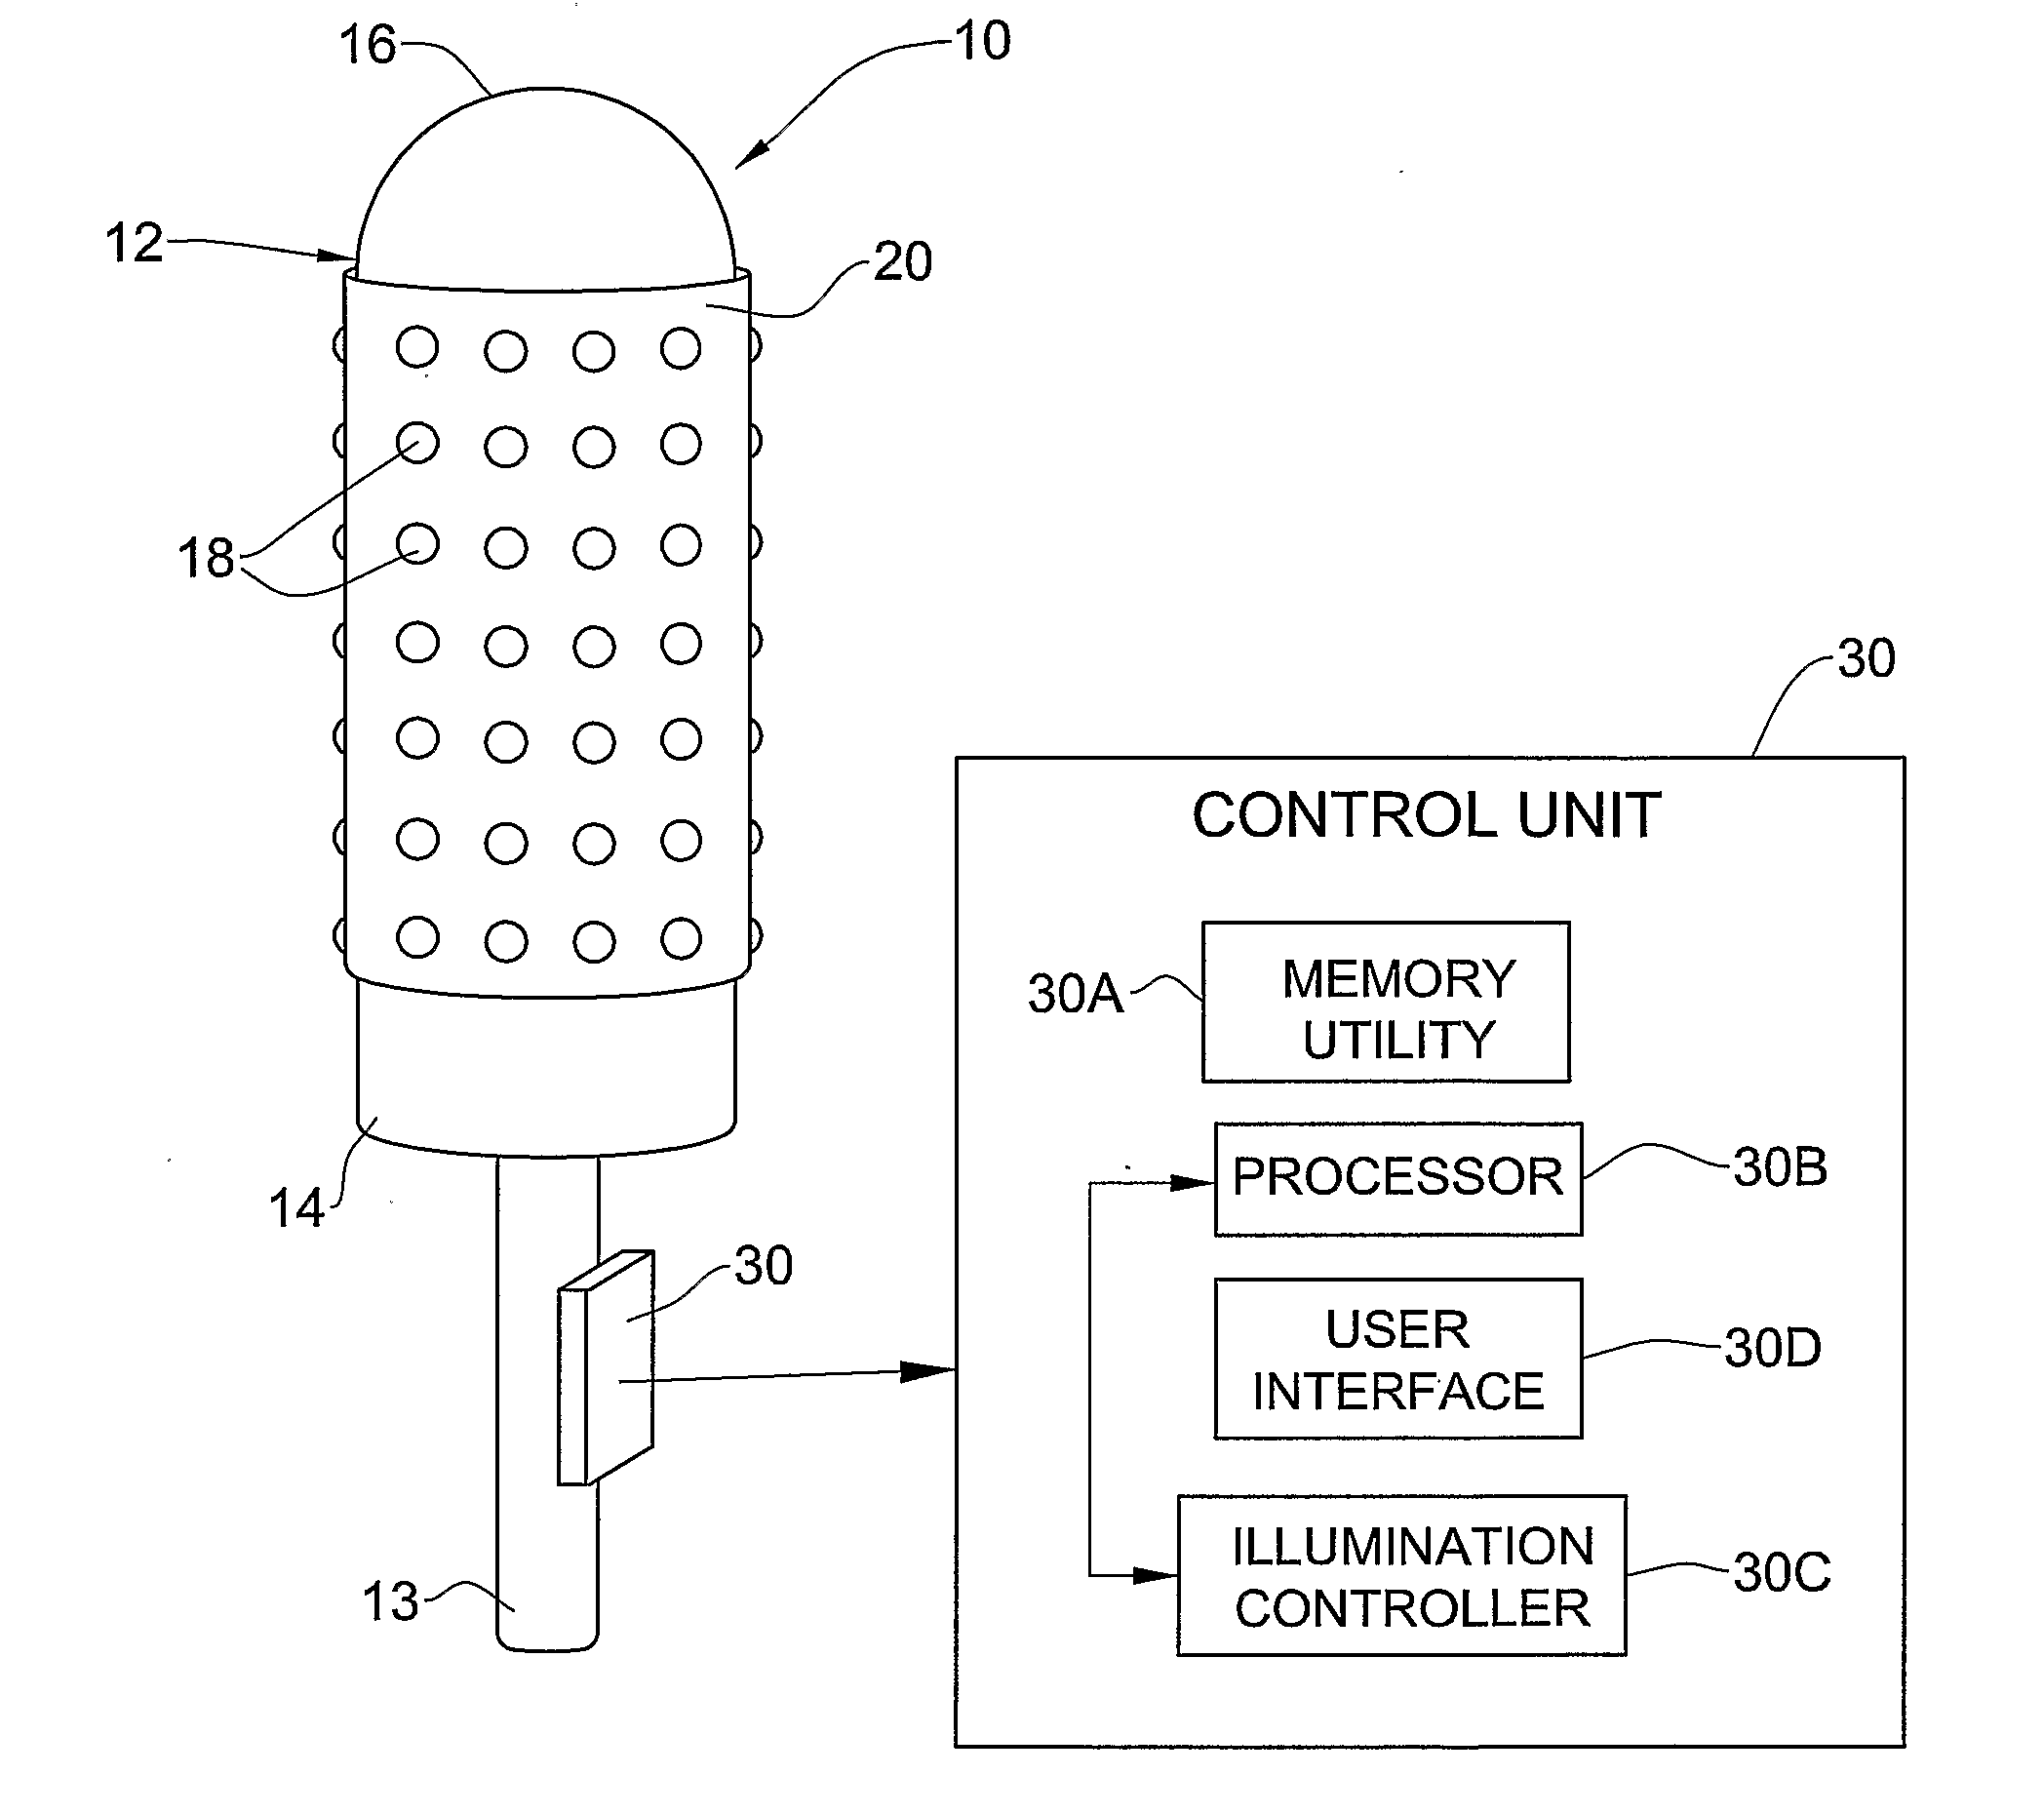 Probe device, system and method for photobiomodulation of tissue lining a body cavity